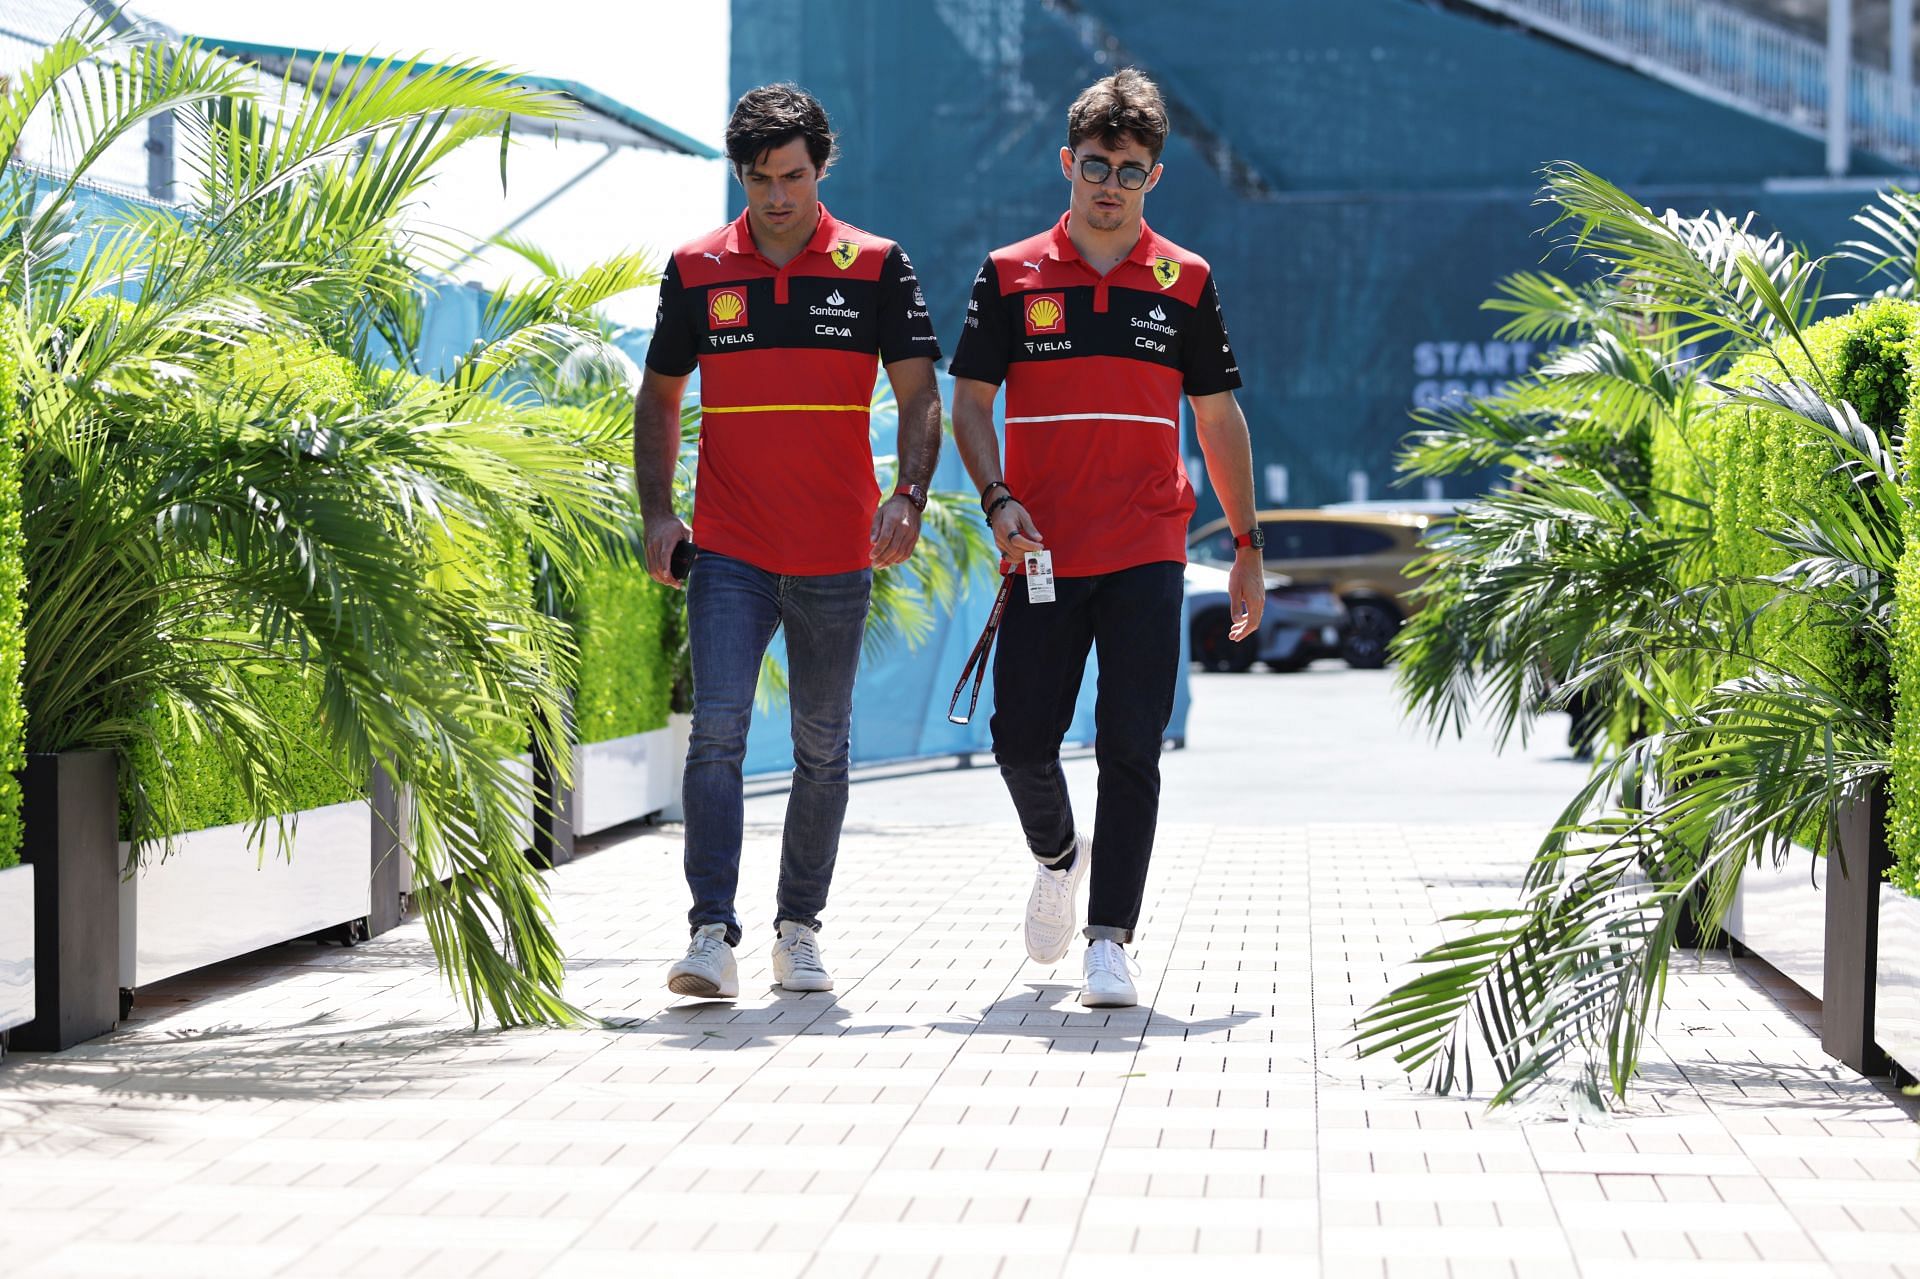 Ferrari drivers Carlos Sainz (left) and Charles Leclerc (right) during the 2022 F1 Miami GP weekend (Photo by Mark Thompson/Getty Images)